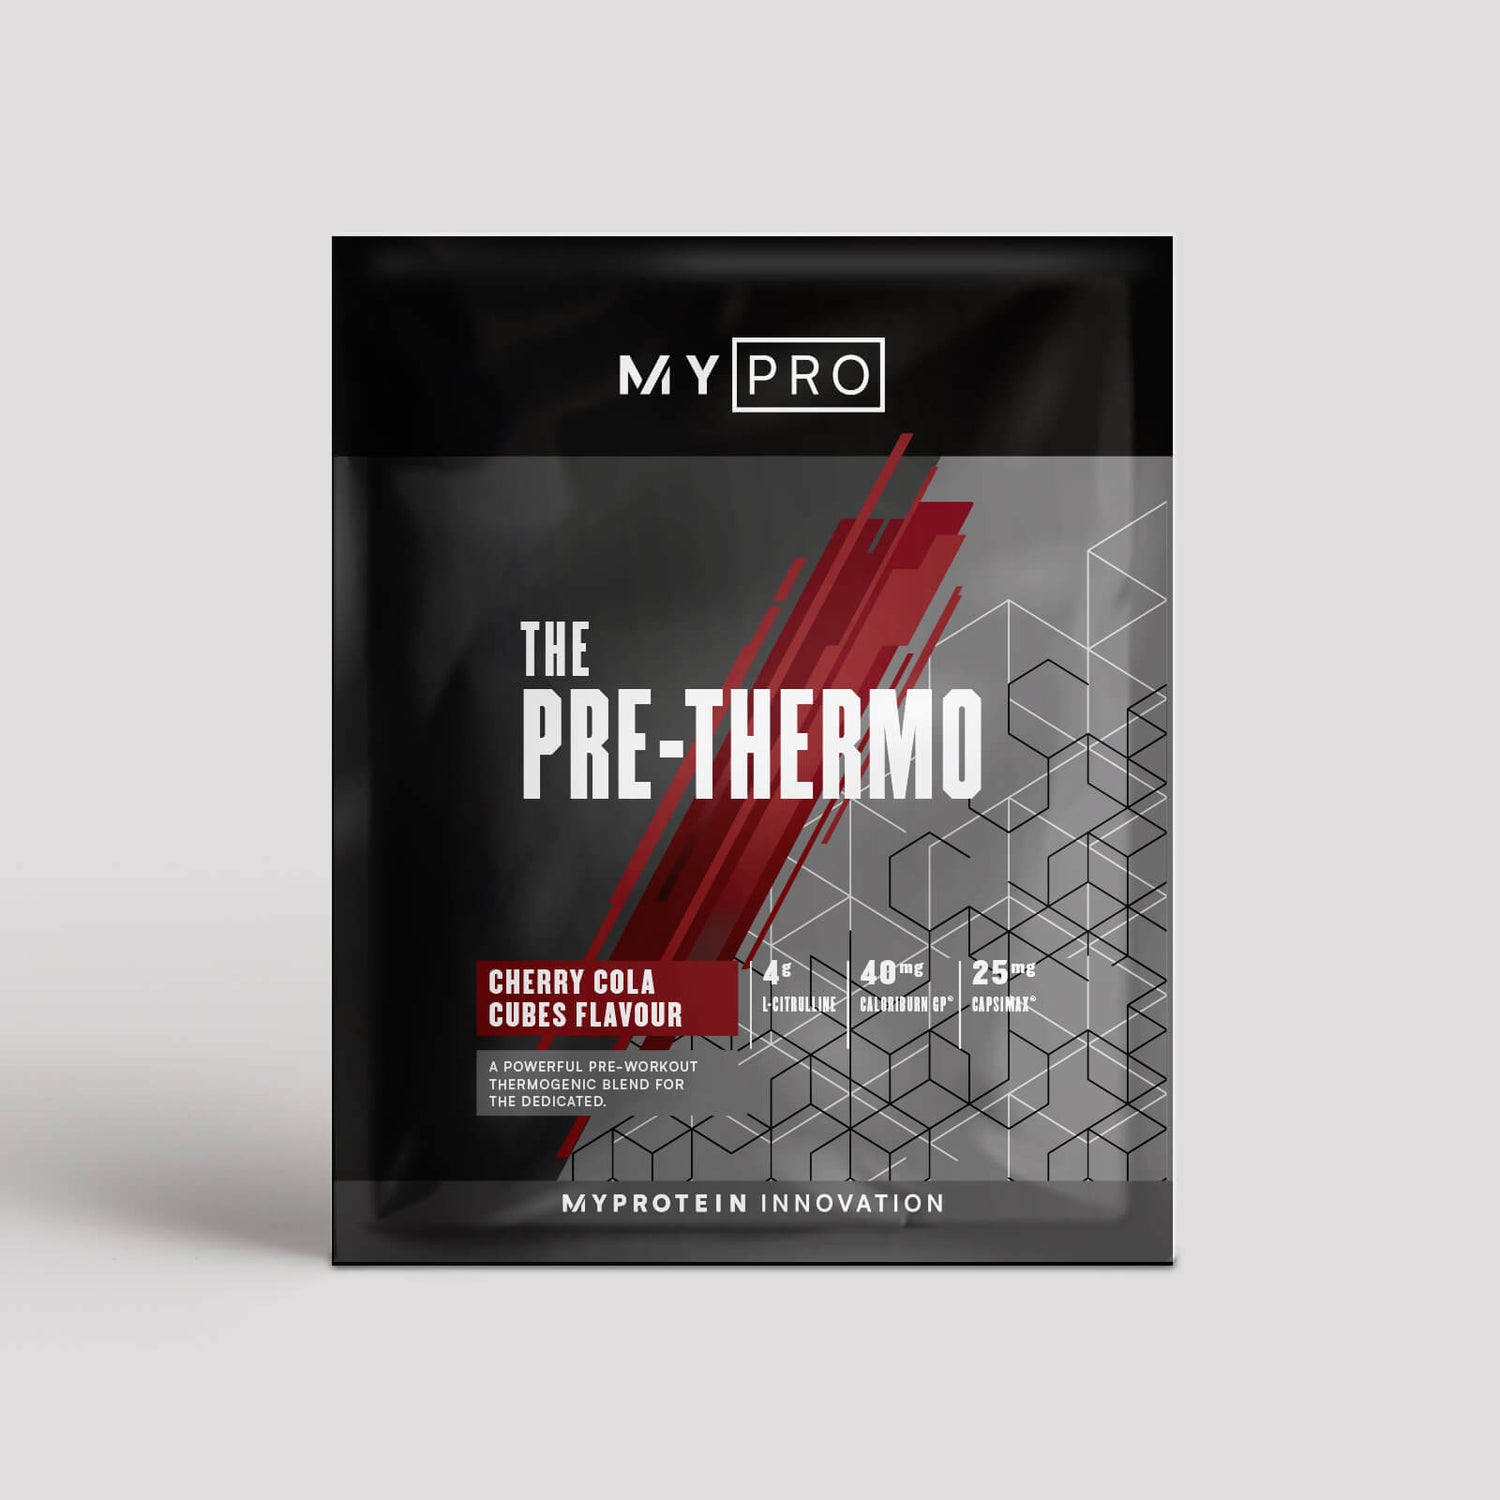 „THE Pre-Thermo“ - 1servings - Cola Cubes